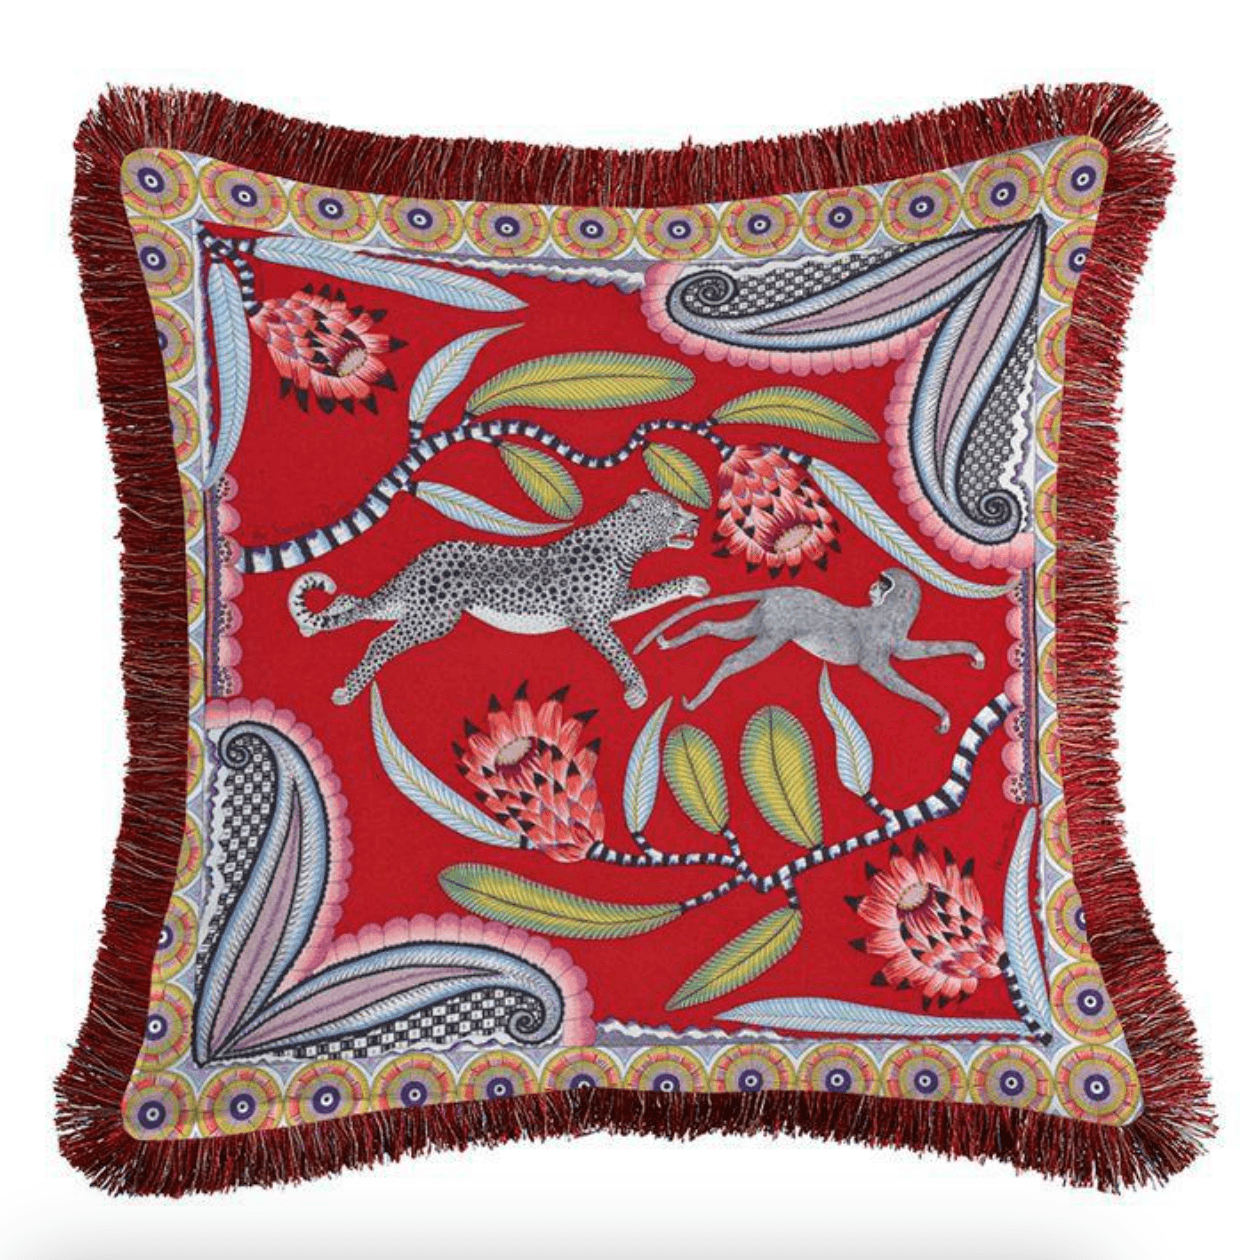 Leopard and Monkey Velvet Throw Pillow Cover with Fringes - MAIA HOMES